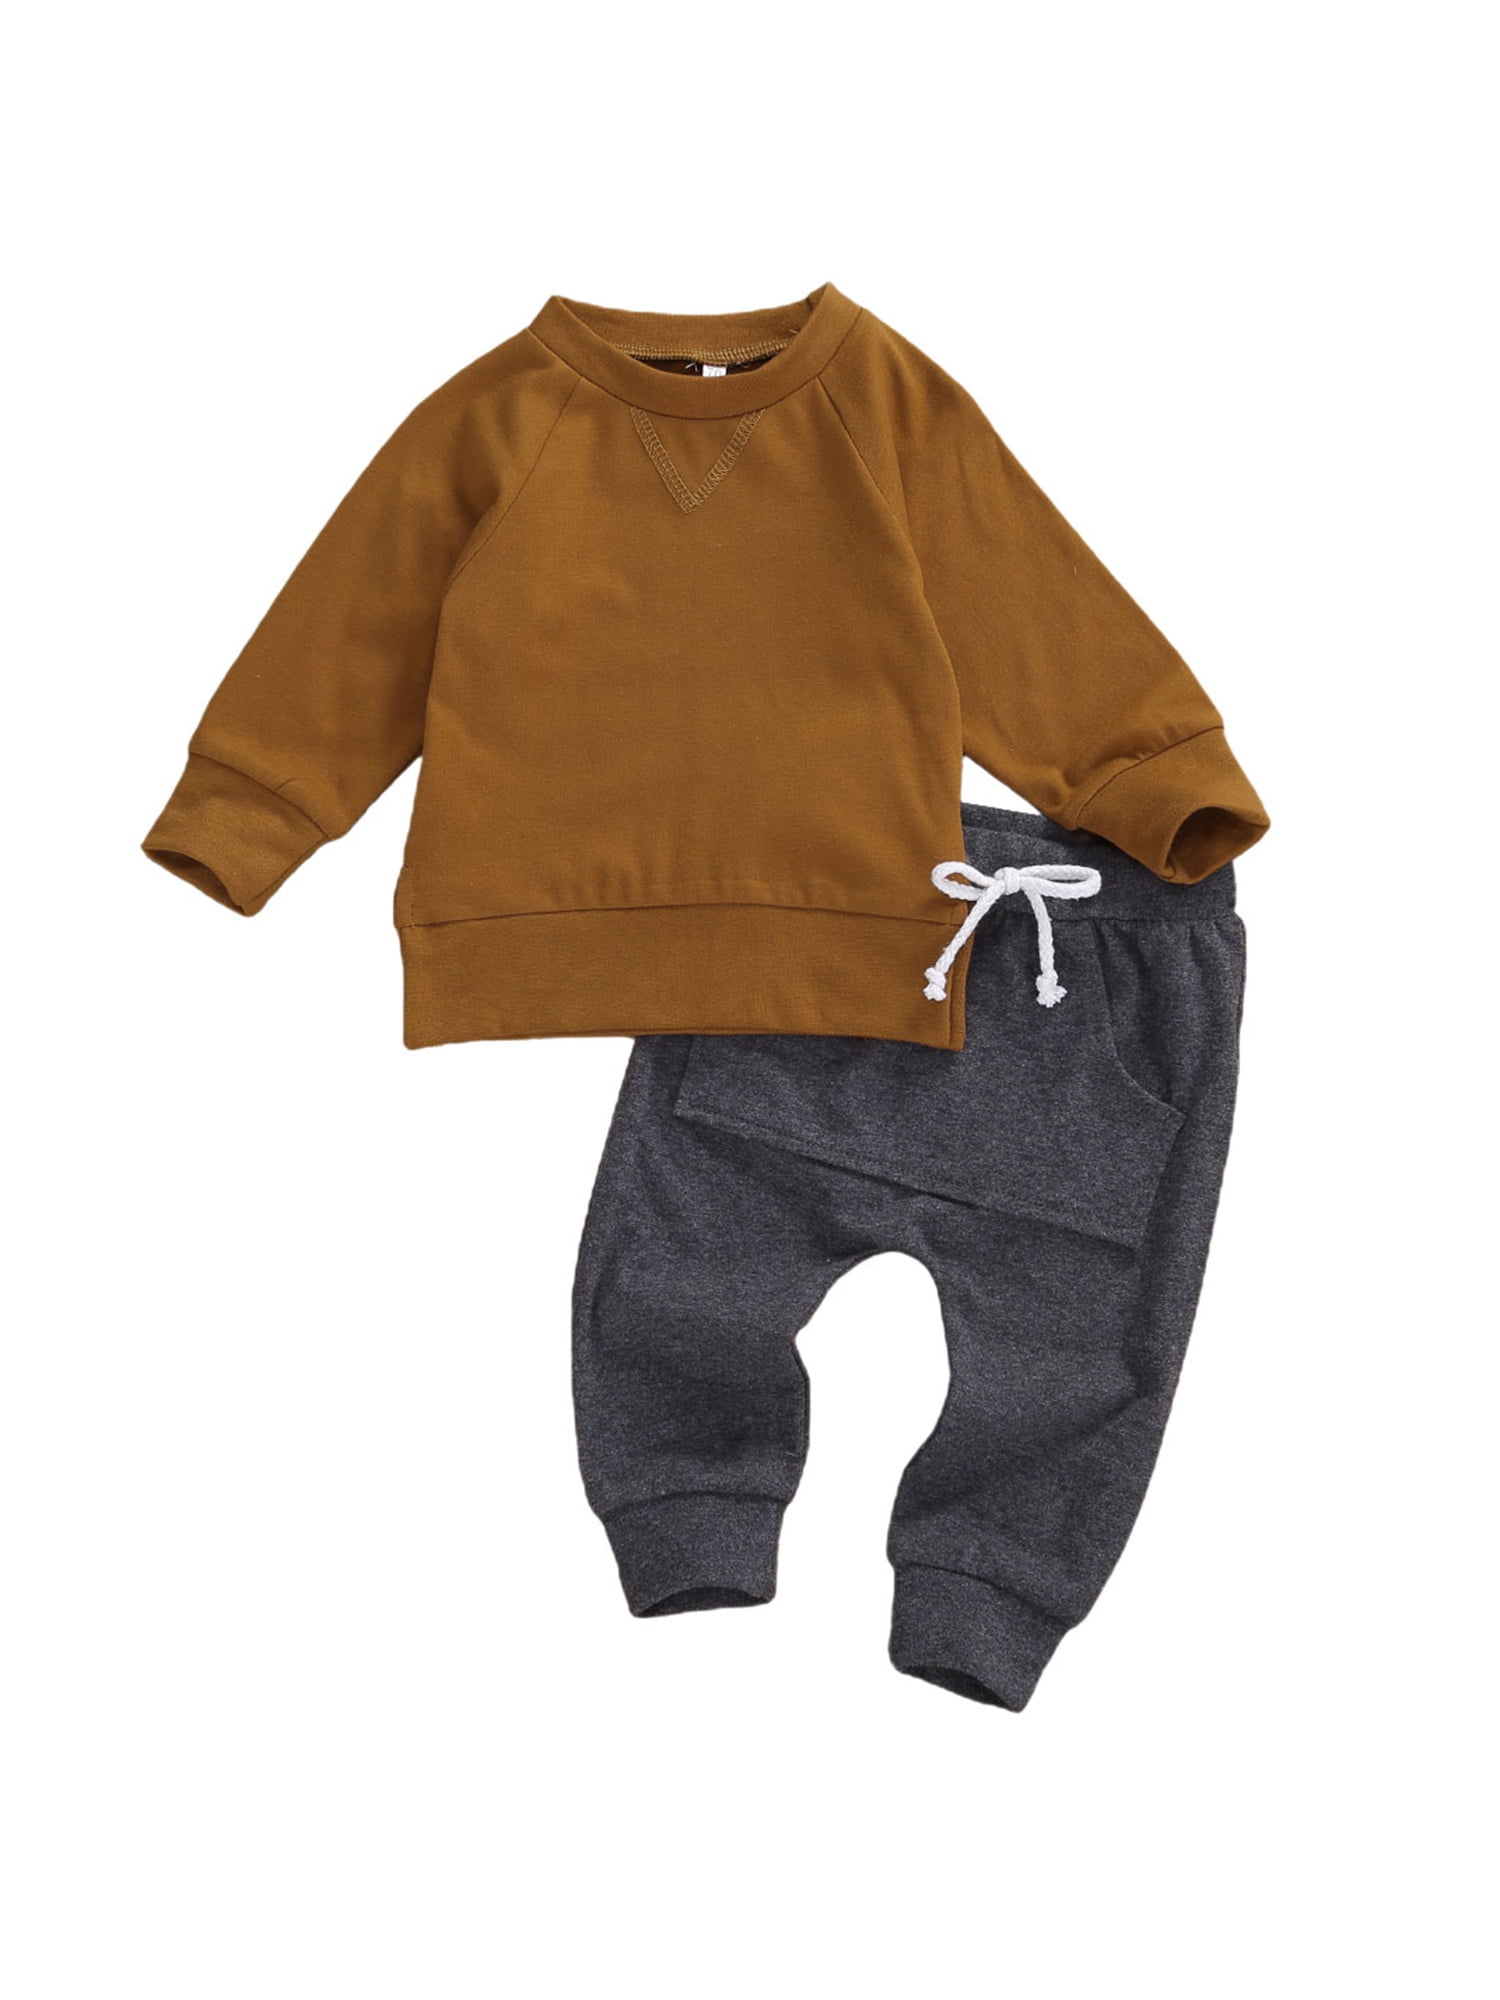 Toddler Baby Boy Clothes Long Sleeve Tops Pants Set Kids Little Boy Clothing Sweatsuit Fall Winter Outfits Set 